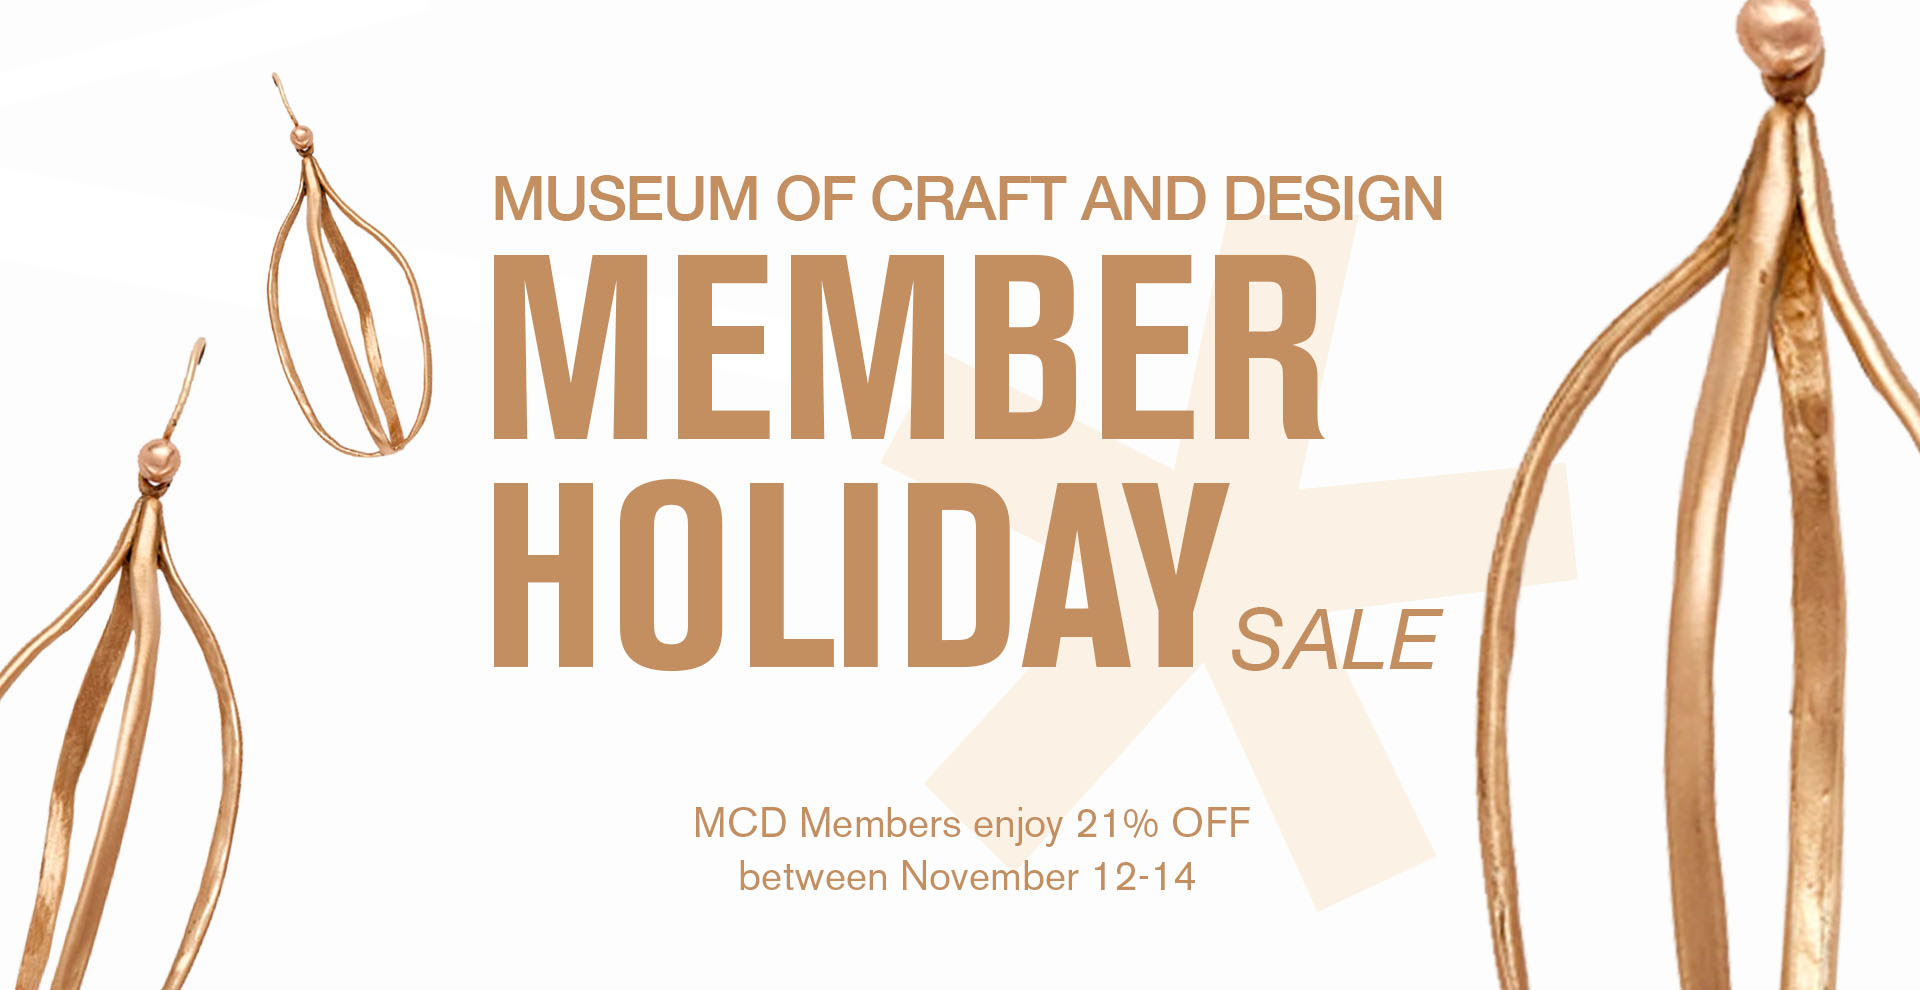 Member Holiday Sale text with gold earings